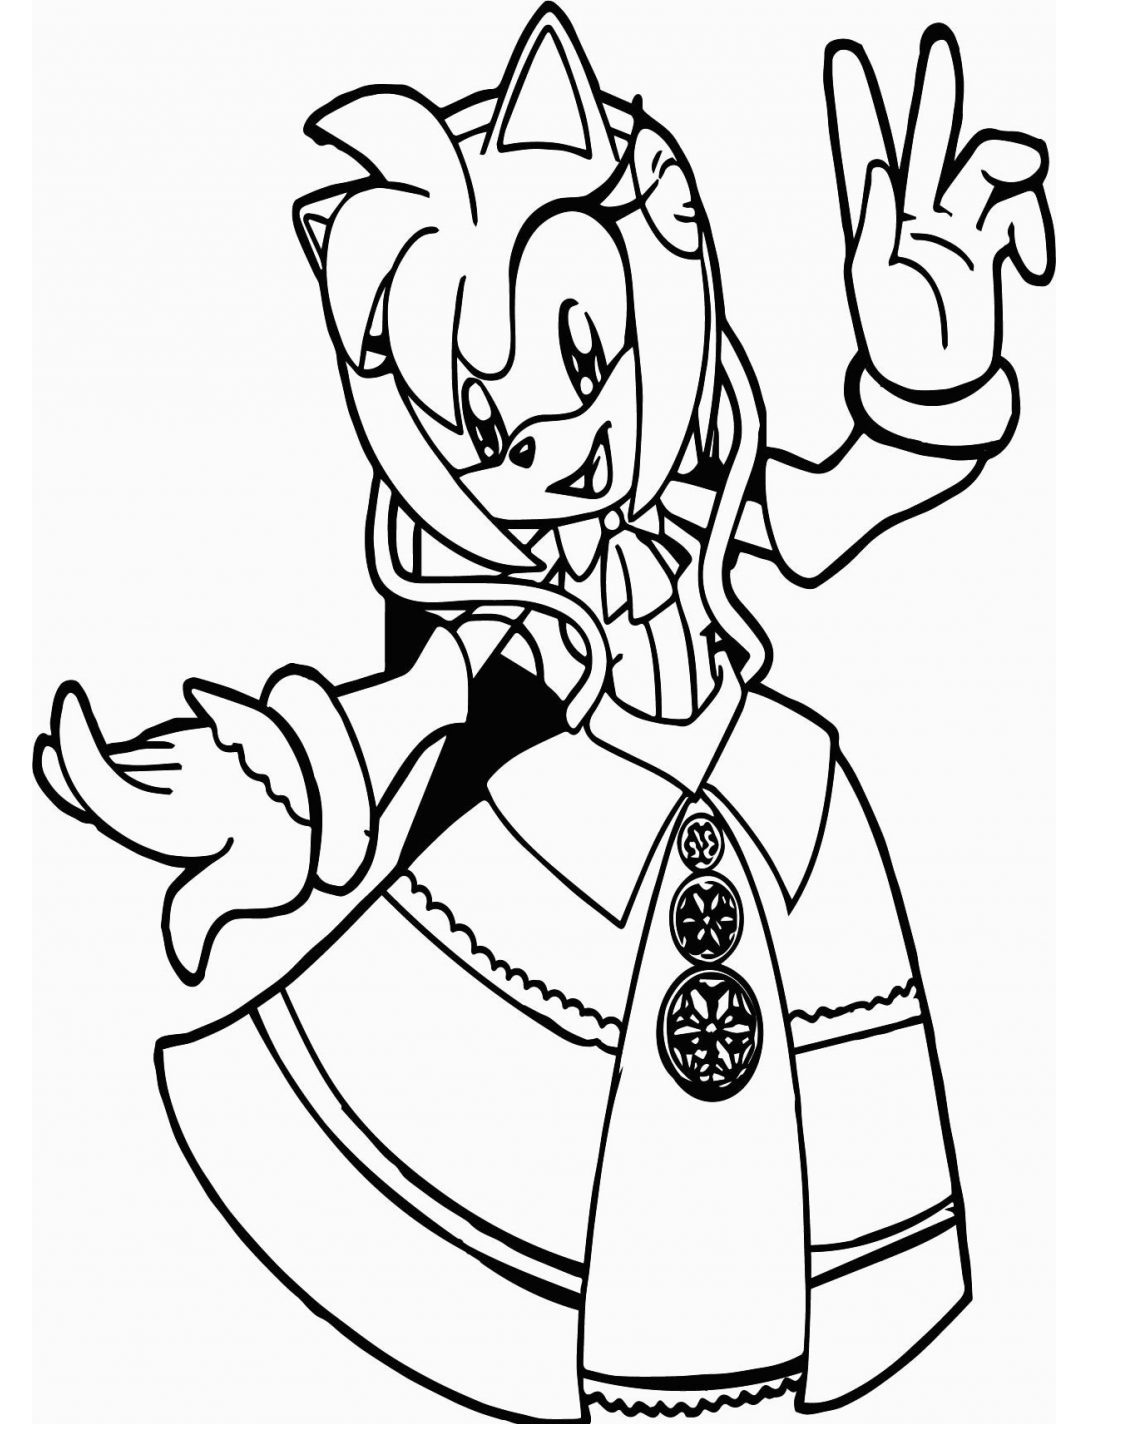 Amy Rose The Hedgehog Coloring Pages